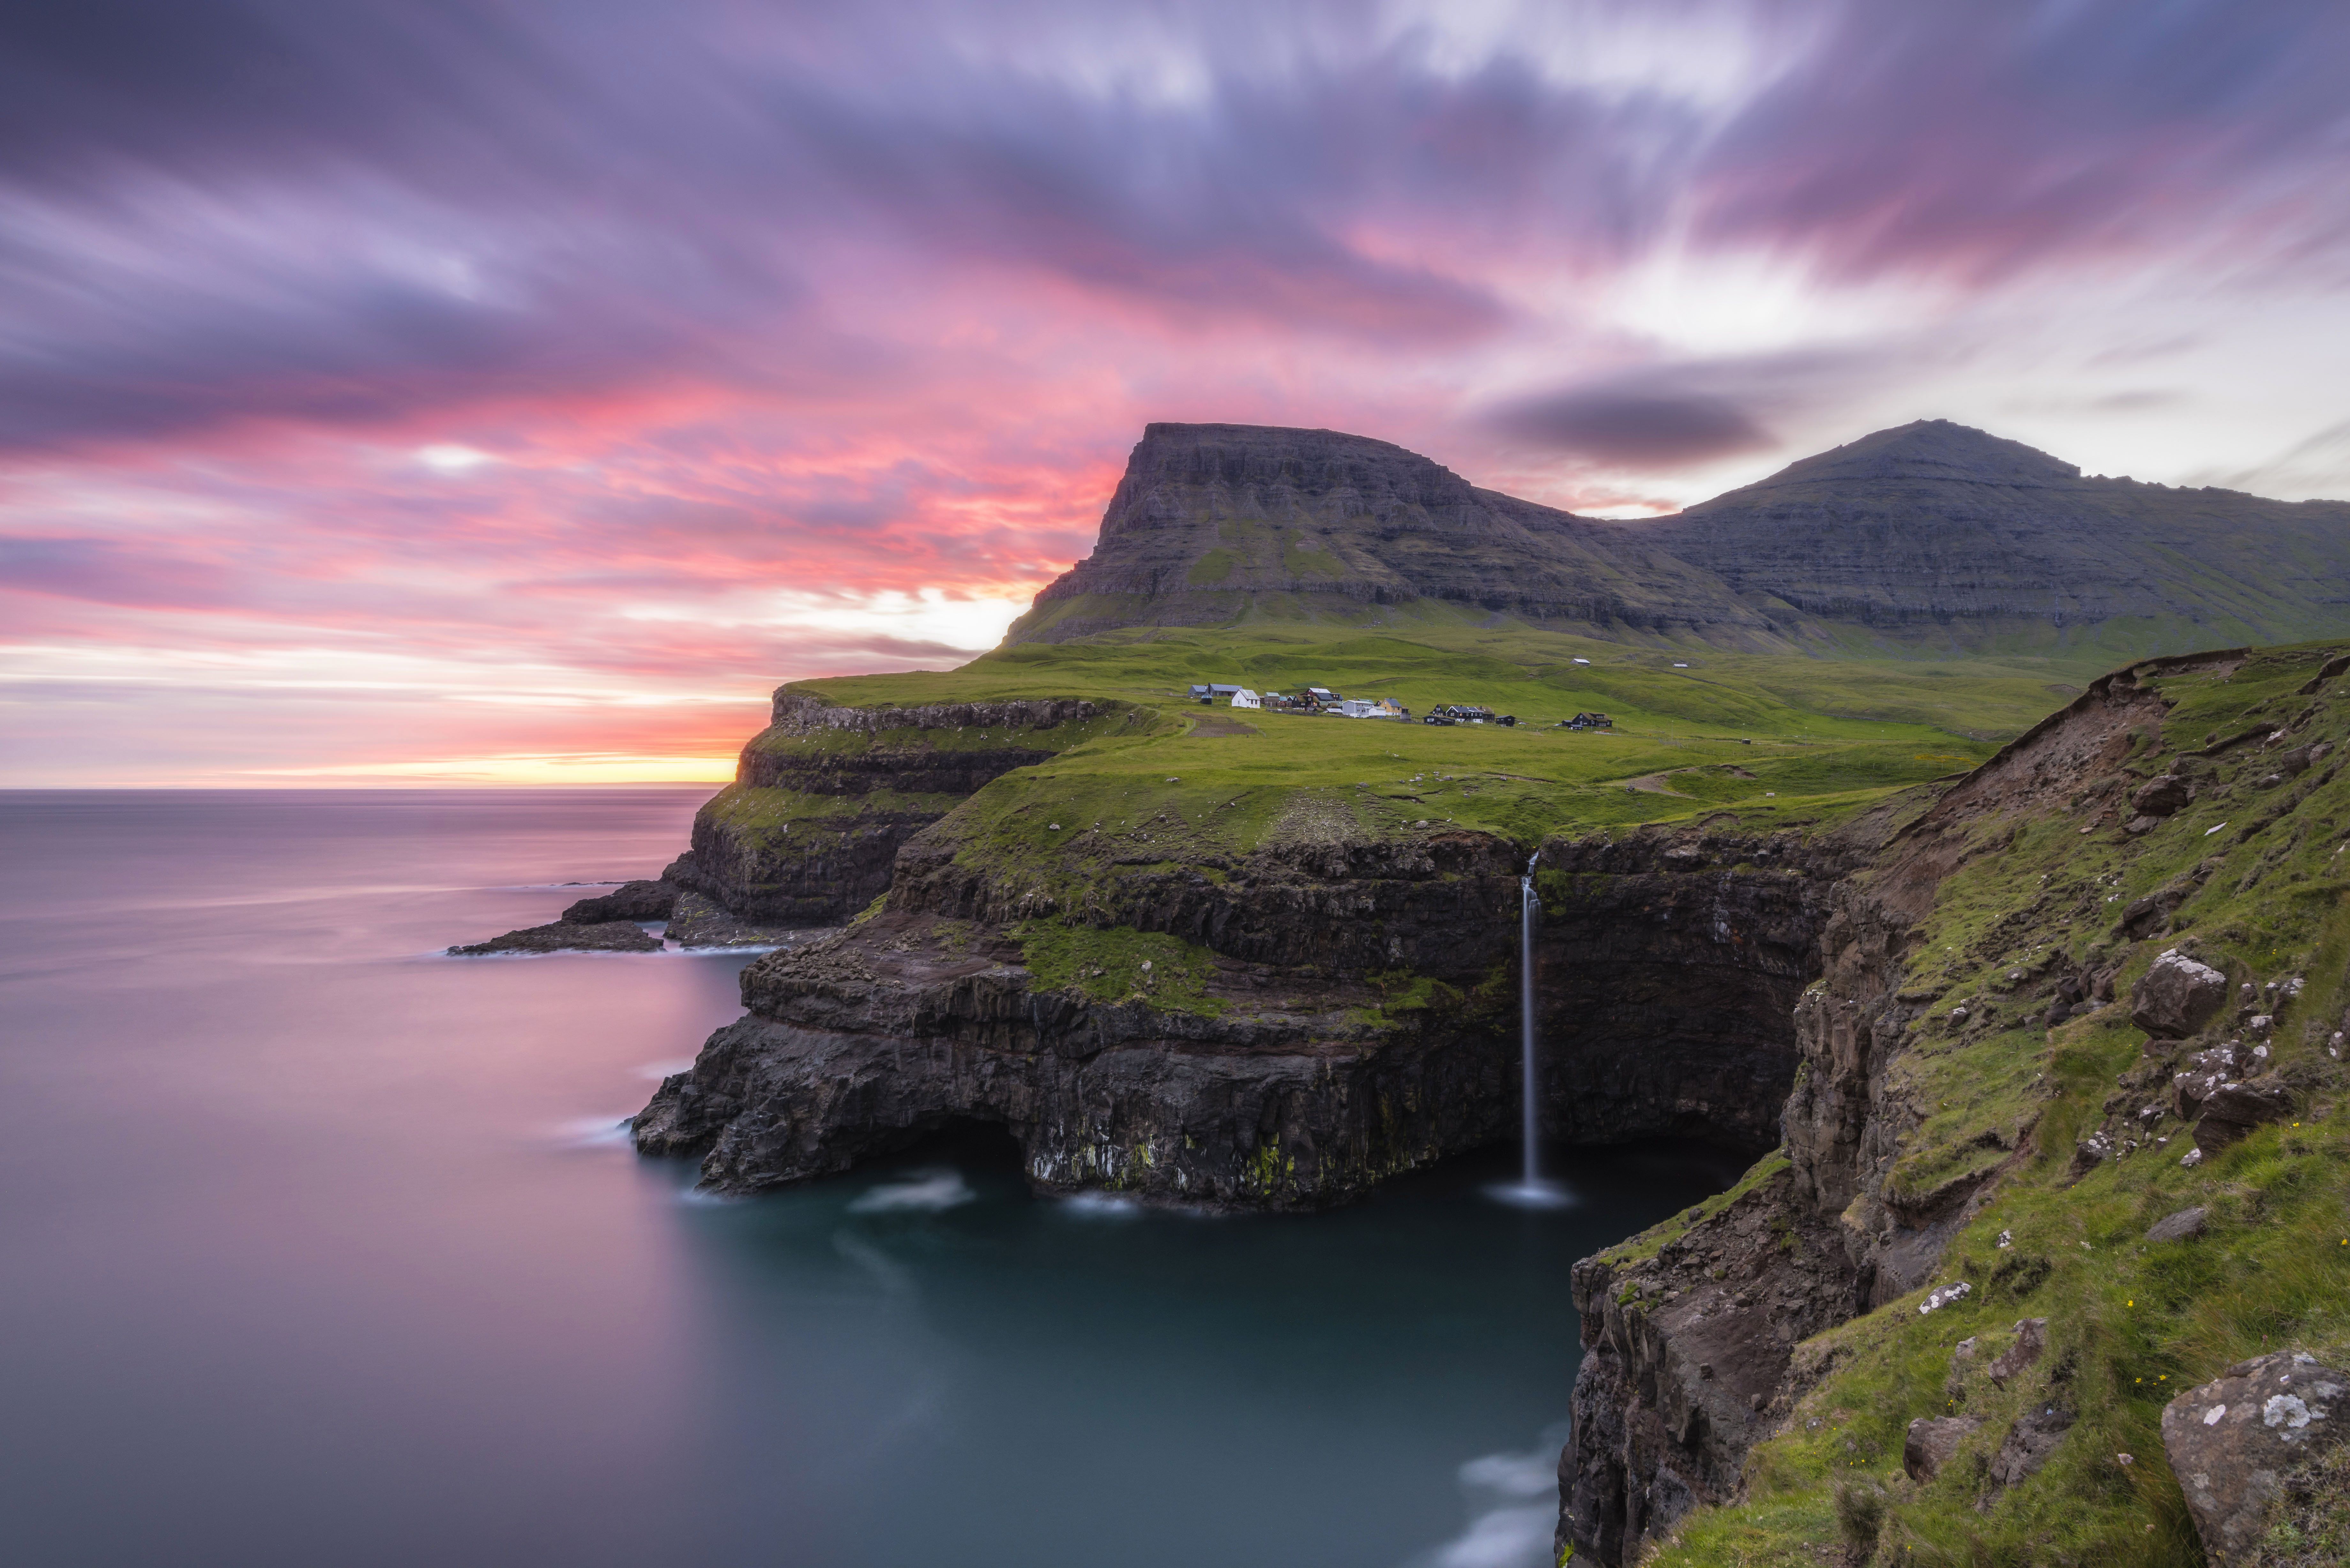 7 Reasons Why The Faroe Islands Are Instagram’s New Favorite Travel Destination